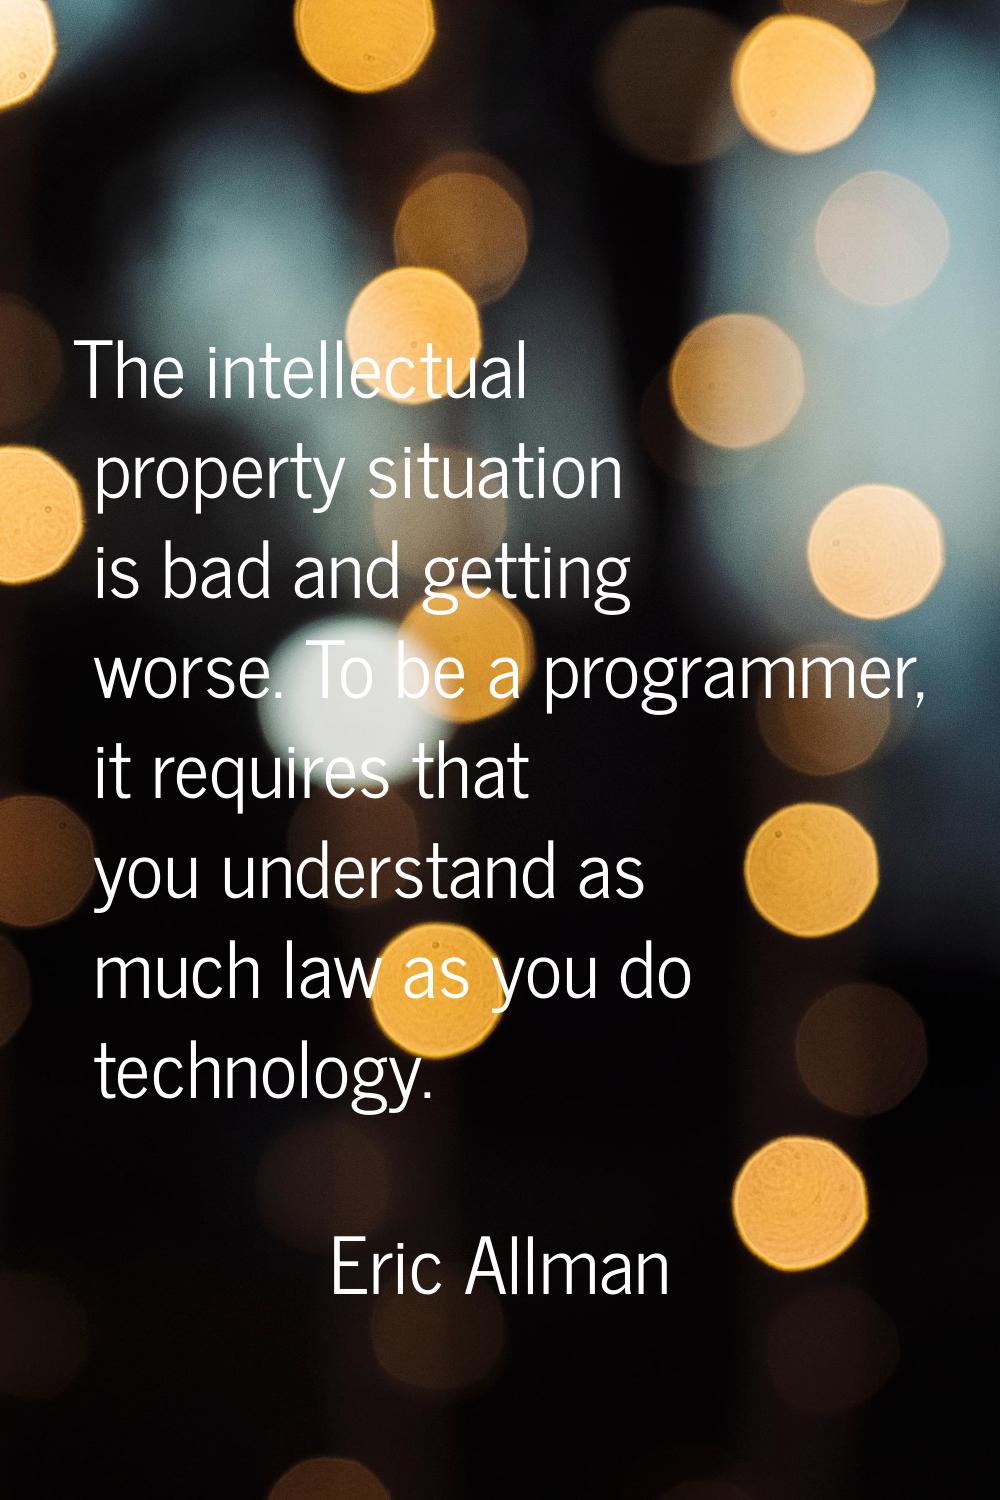 The intellectual property situation is bad and getting worse. To be a programmer, it requires that 